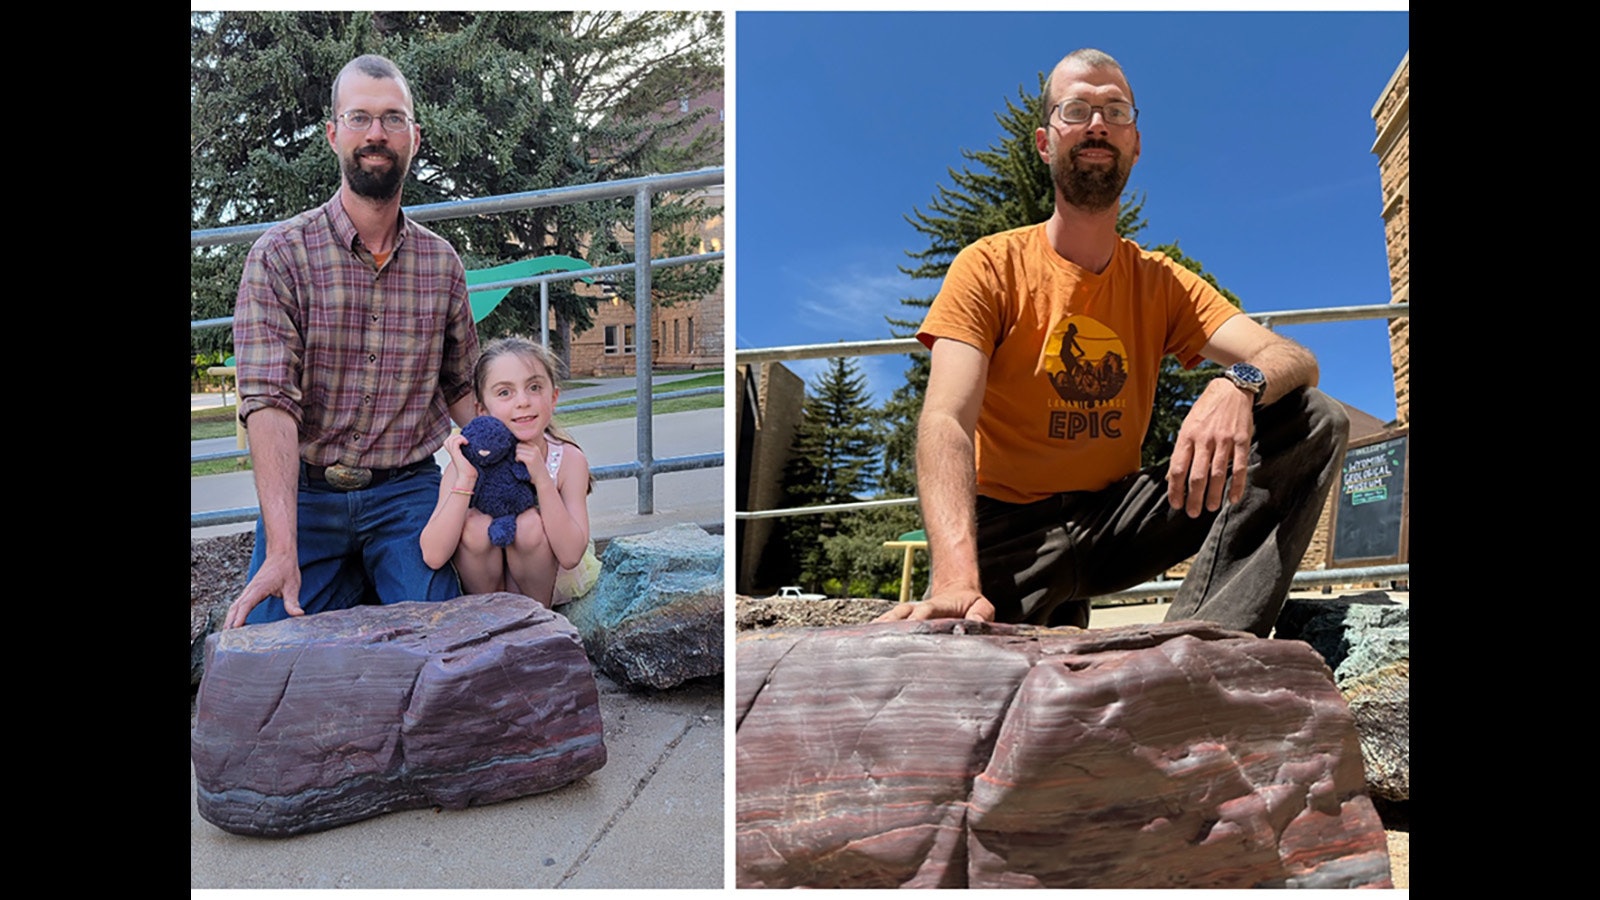 This huge chunk of banded iron rock is a one-of-a-kind Wyoming discovery by Laramie resident Patrick Corcoran and his daughter, Cora. It's now on display at the University of Wyoming Geological Museum.